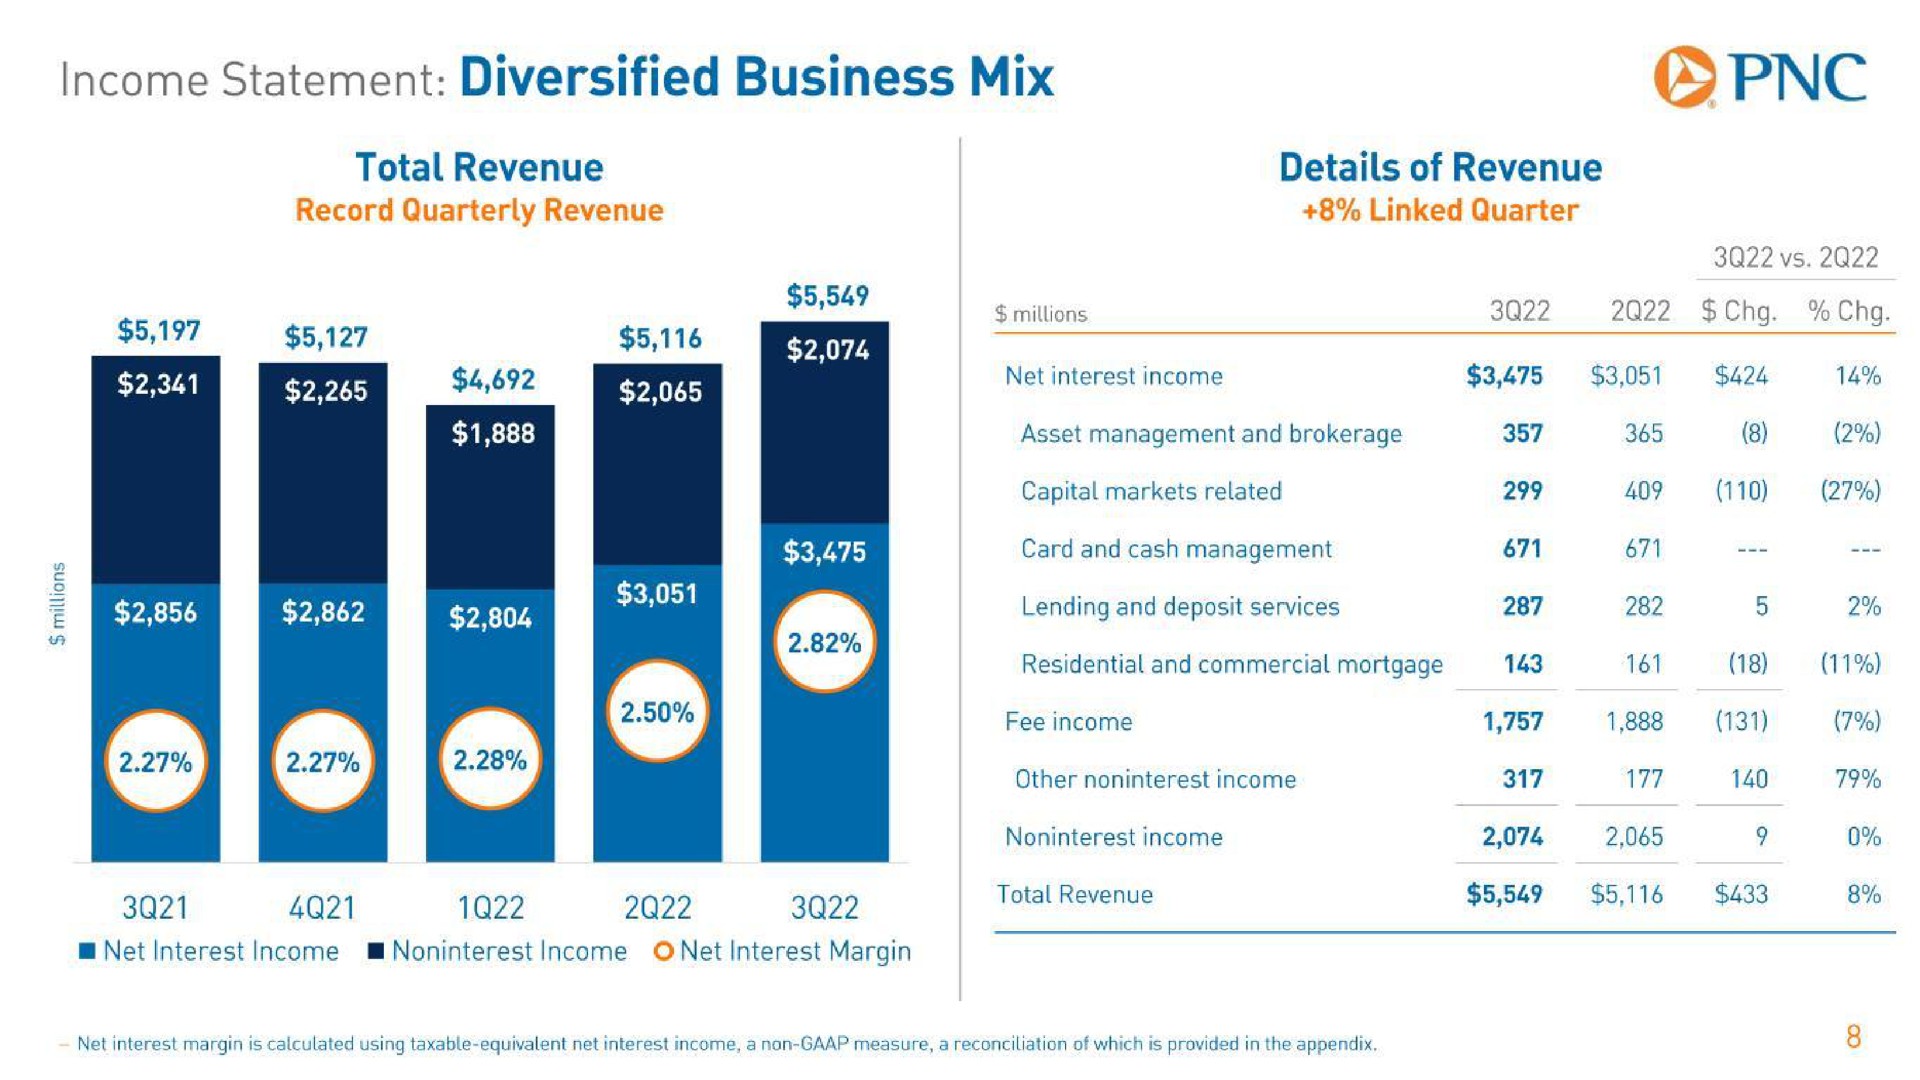 income statement diversified business mix | PNC Financial Services Group